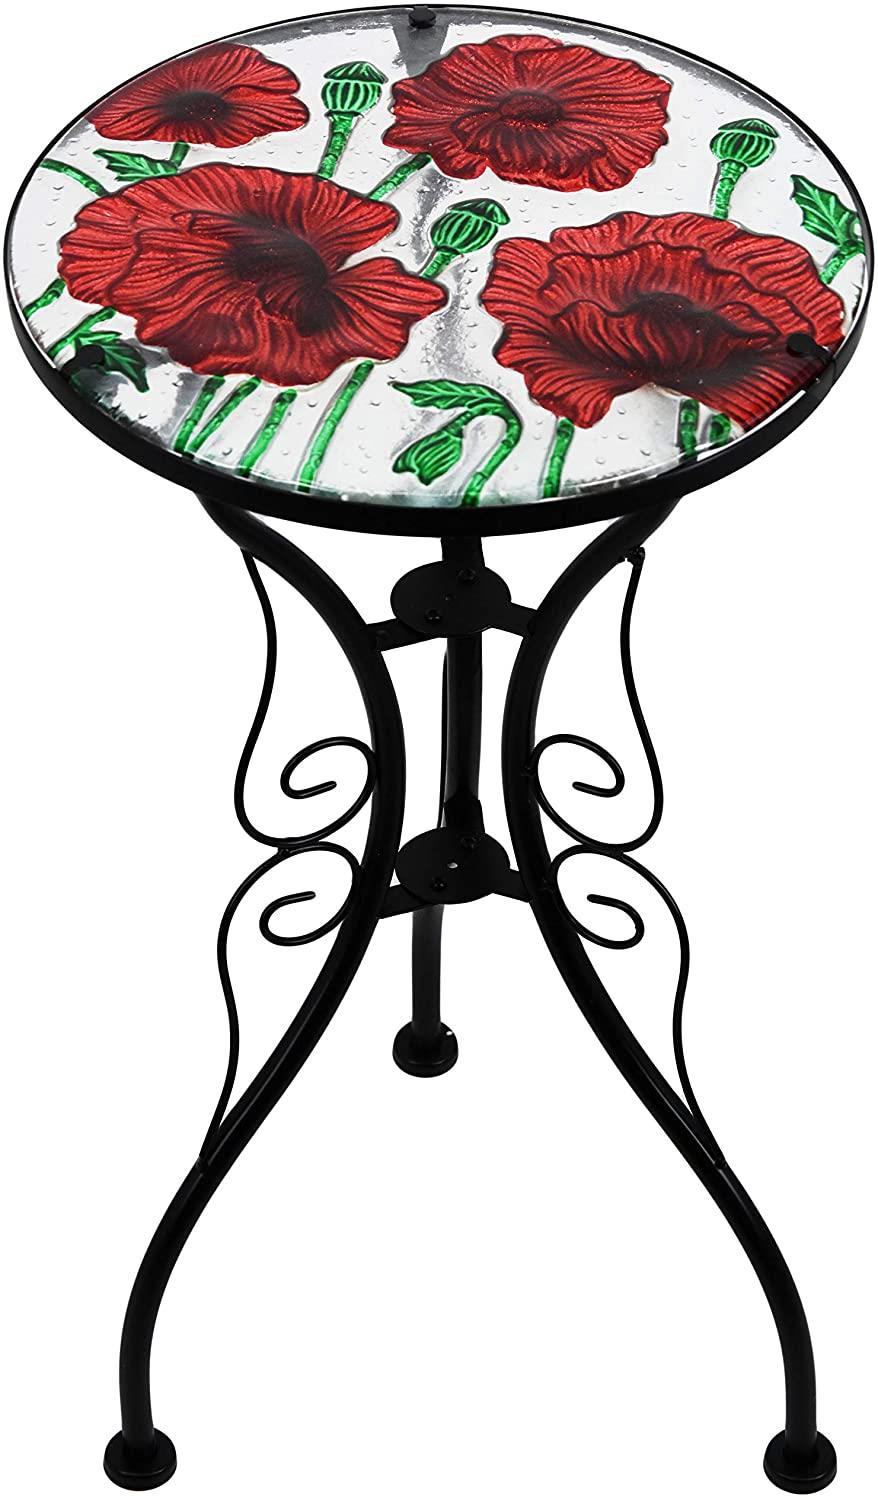 Geezy table Round Side Mosaic Garden Table With Poppies Design